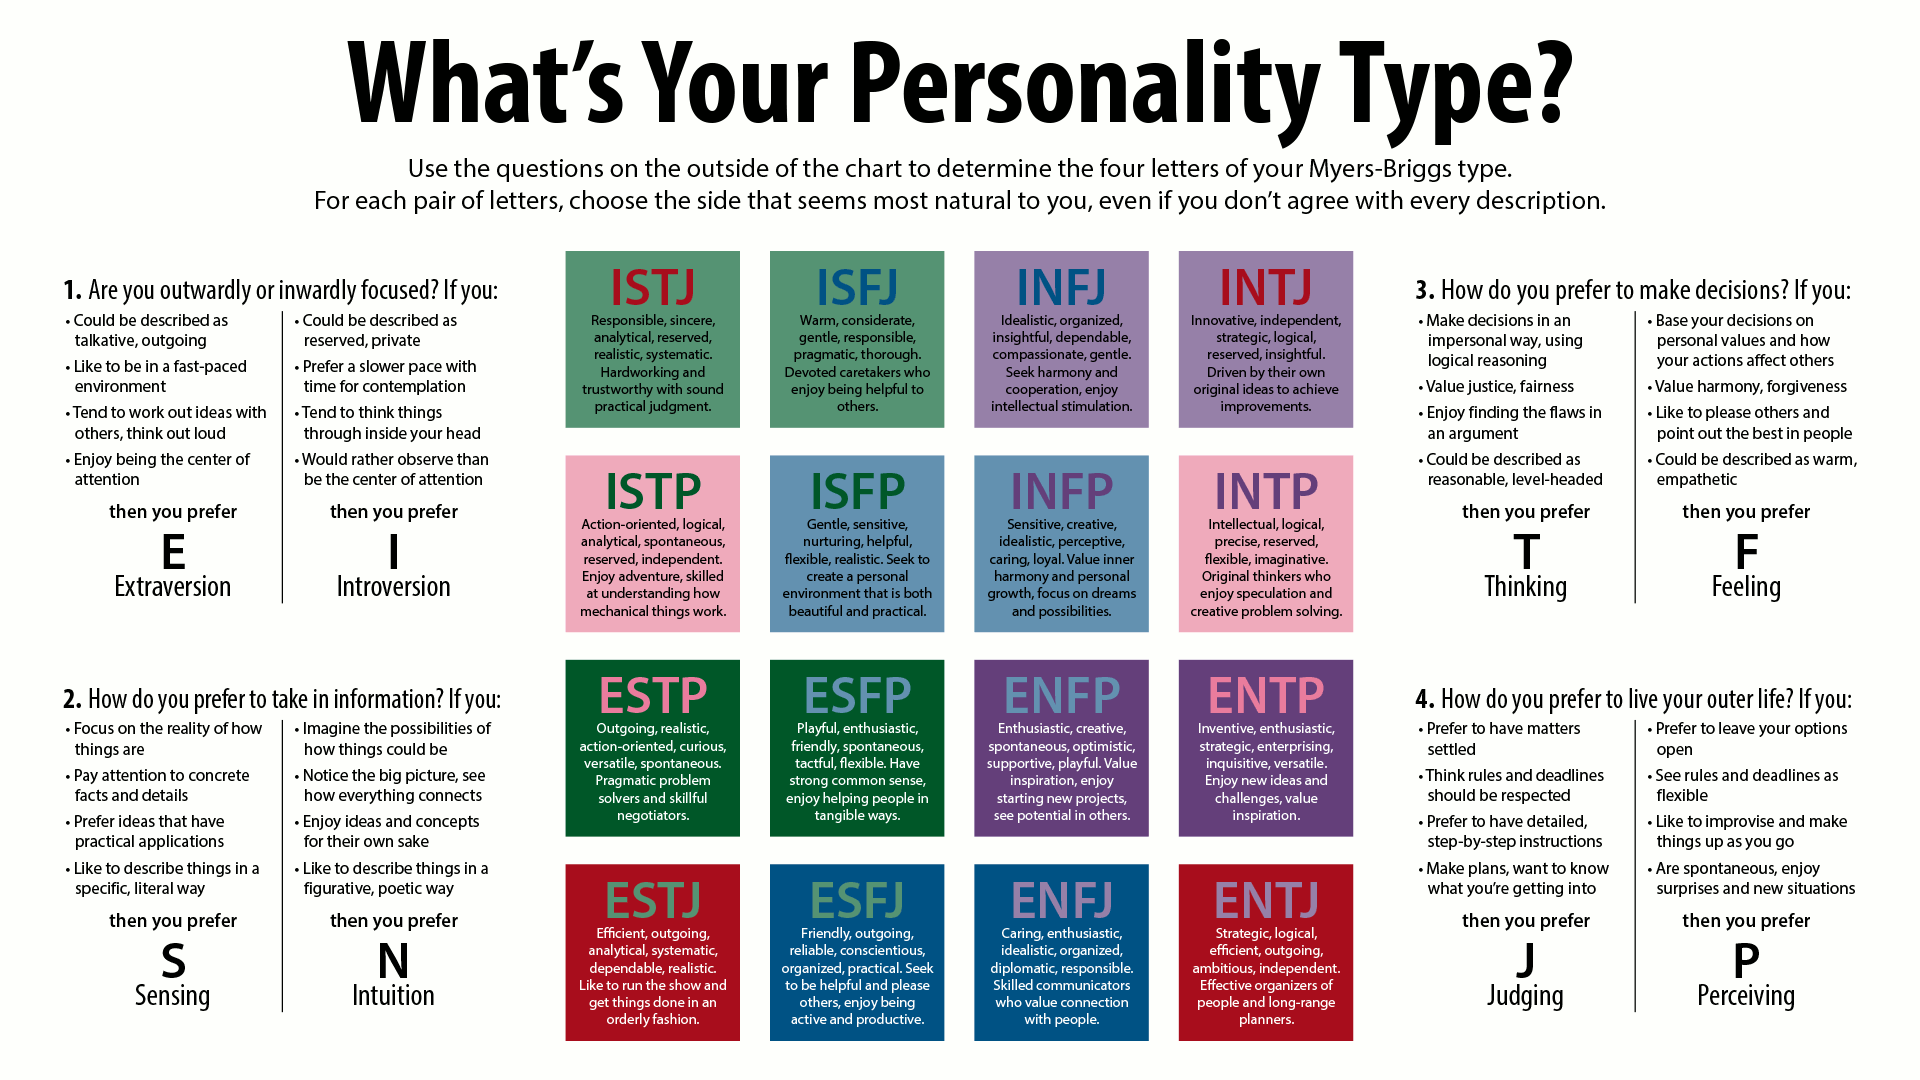 rs MBTI Types, Page 17